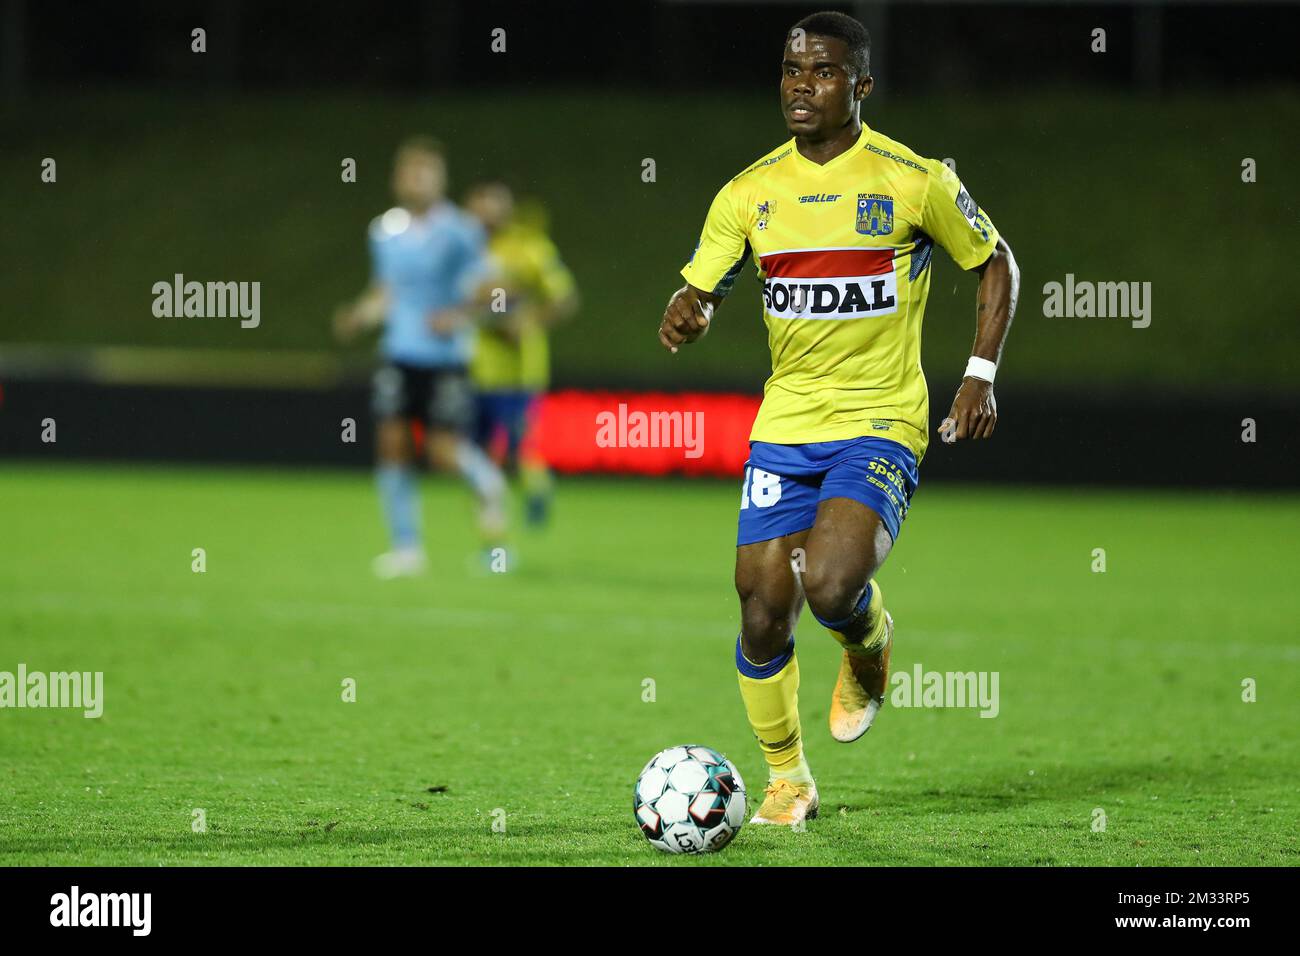 Westerlo's Kouya Mabea pictured in action during a soccer match between KMSK Deinze and Westerlo, Friday 23 October 2020 in Deinze, on day 8 of the 'Proximus League' 1B second division of the Belgian soccer championship. BELGA PHOTO DAVID PINTENS Stock Photo